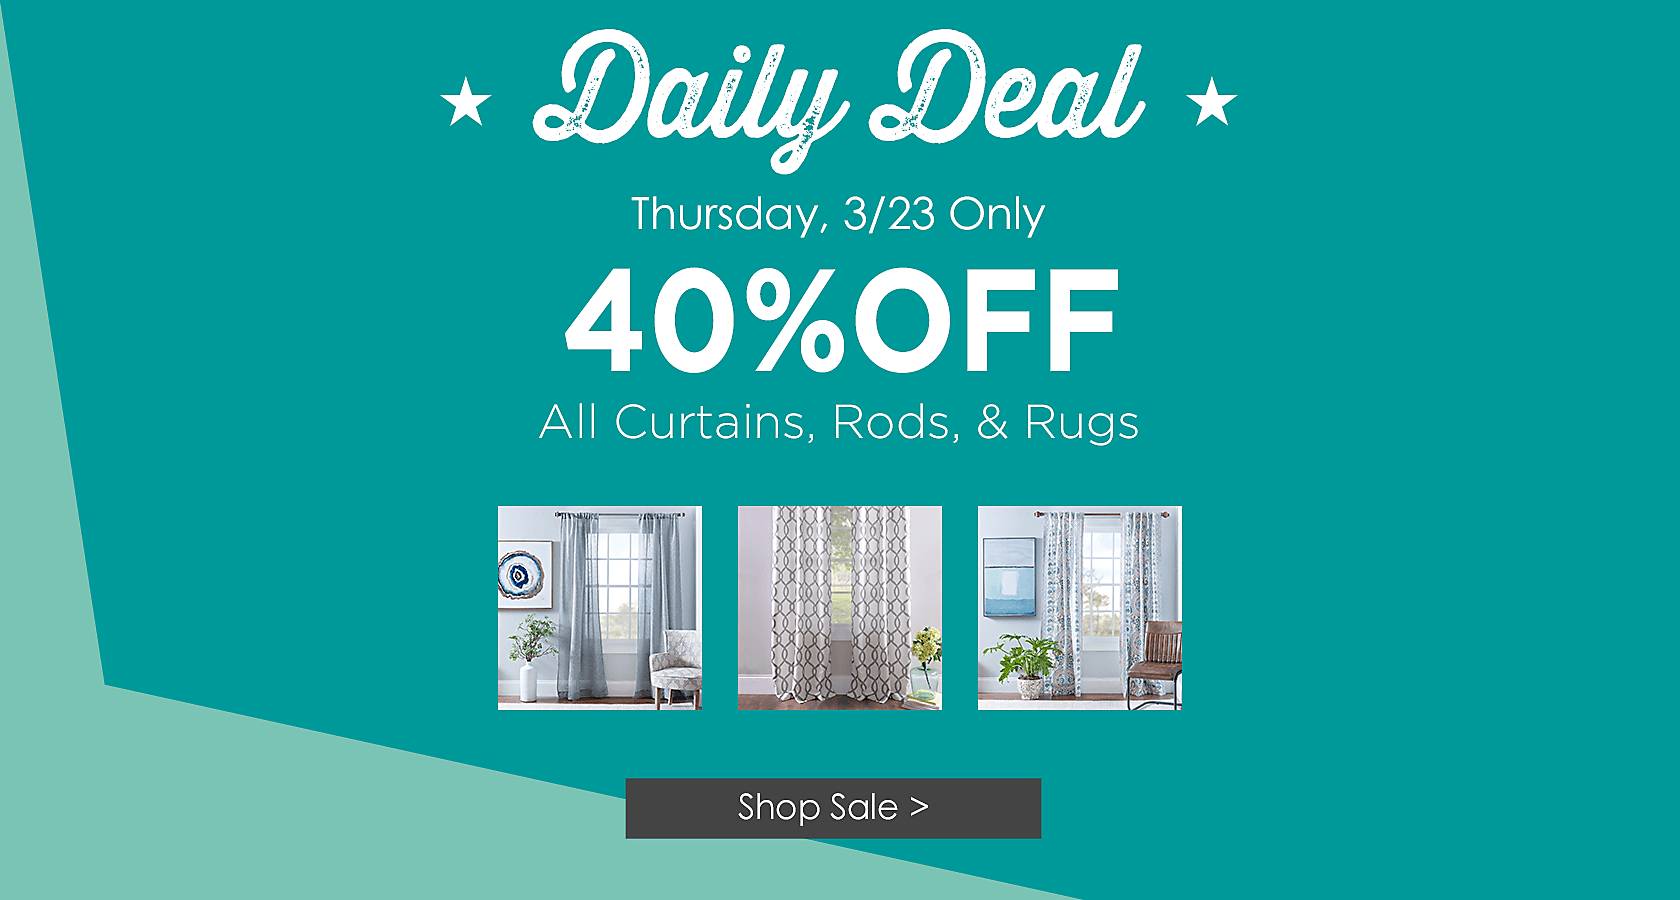 Daily Deal, Thursday Only - 40% Off All Curtains, Rods and Rugs - Shop Now